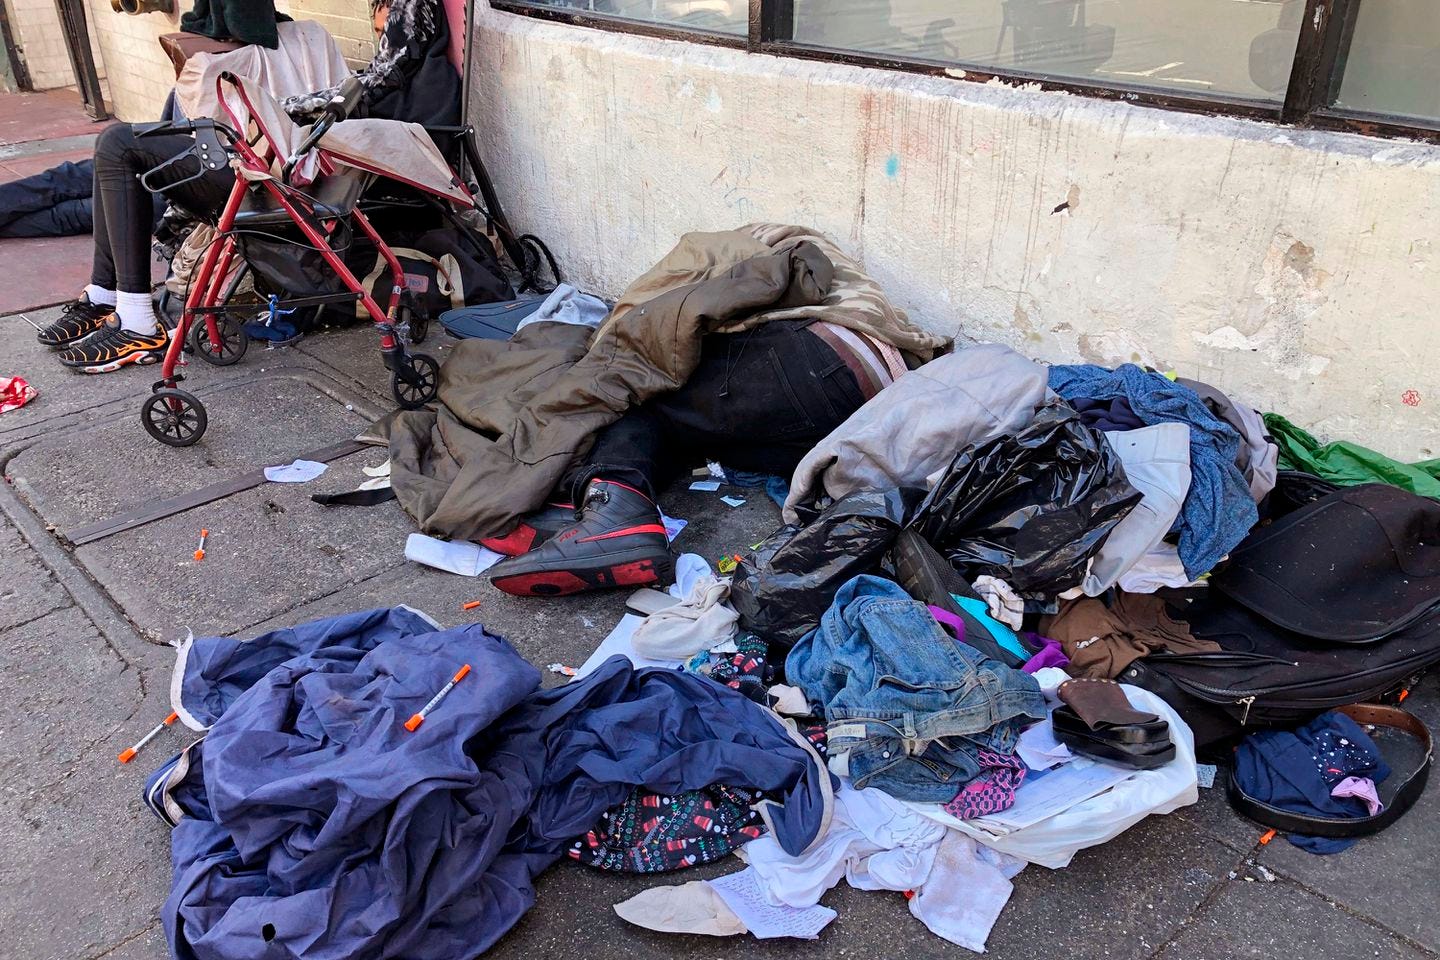 People slept near discarded clothing and used needles on a street in the Tenderloin neighborhood in San Francisco in 2019.